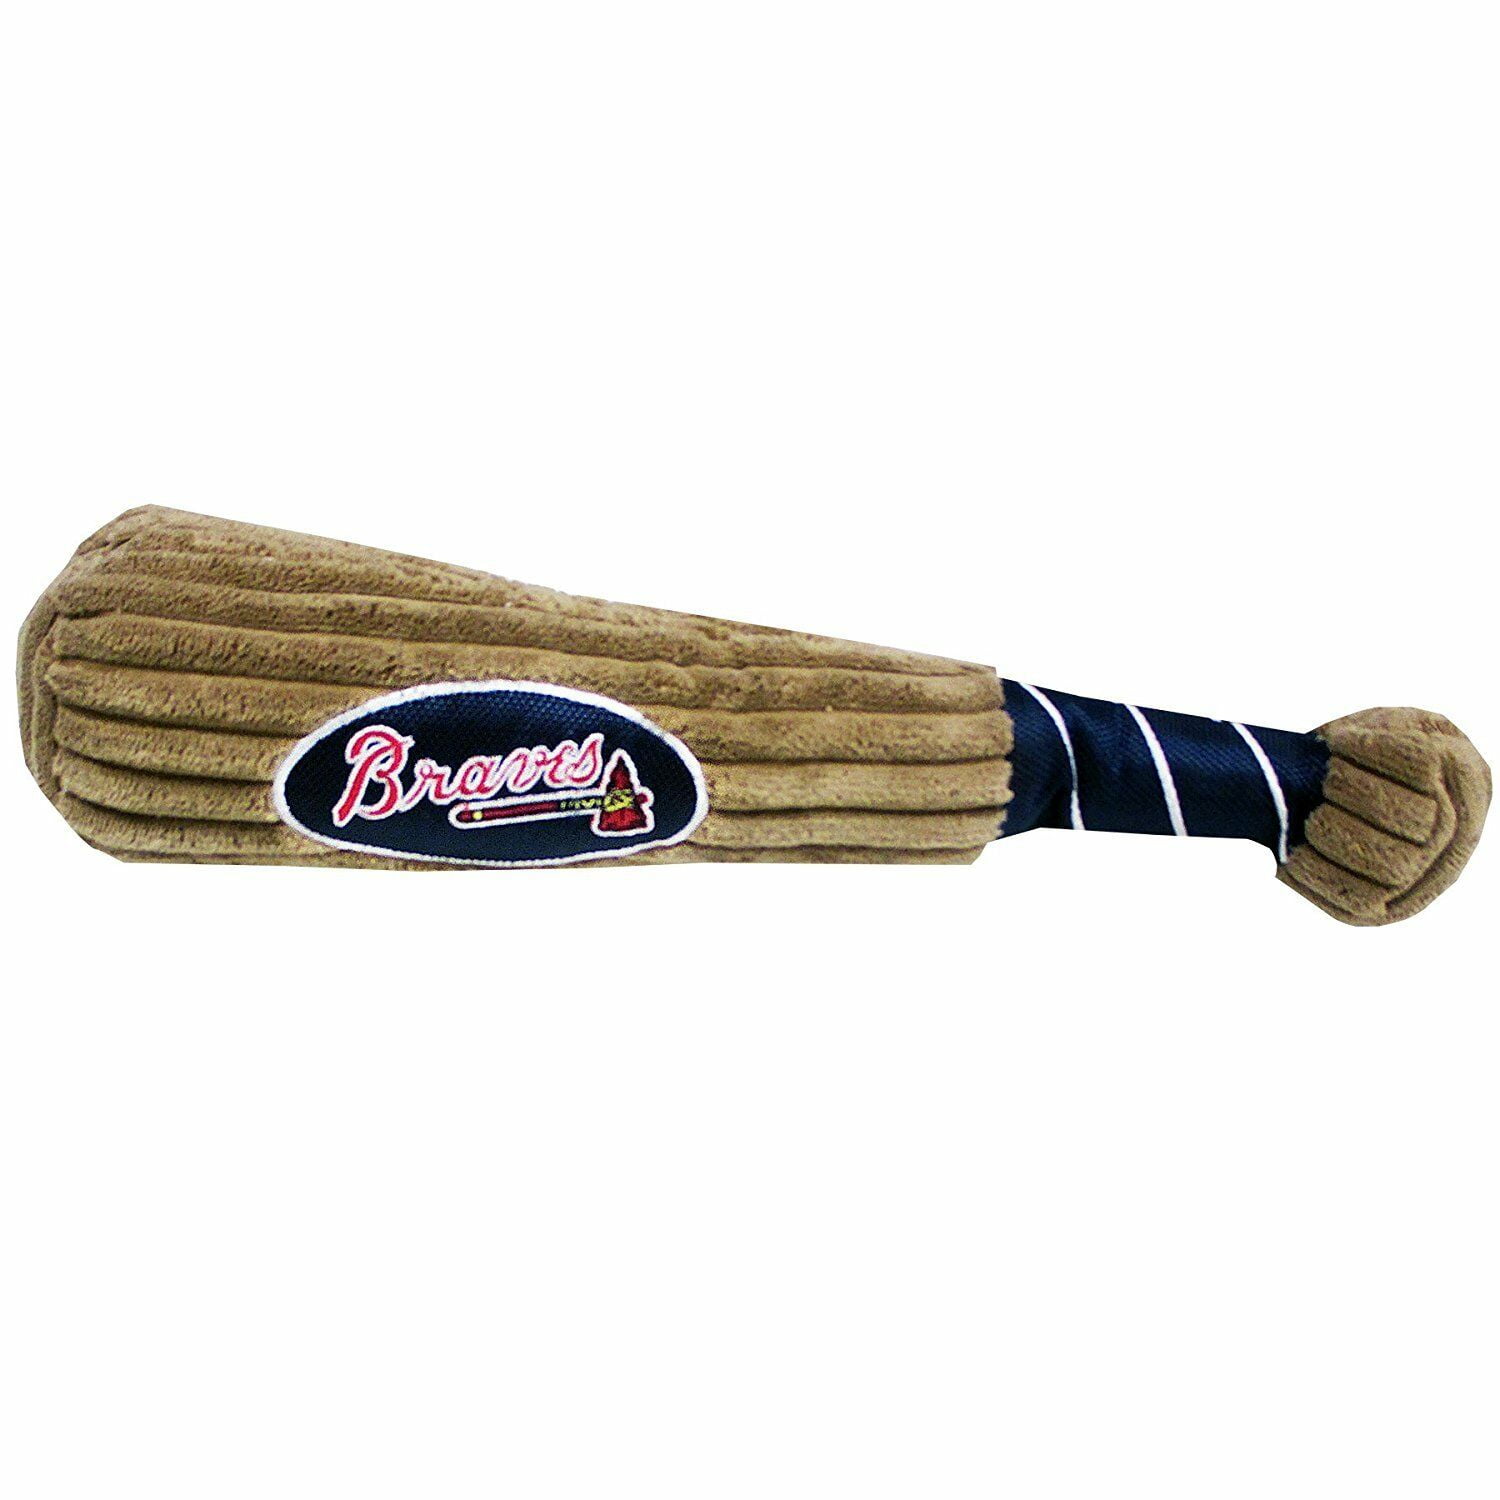 Official Atlanta Braves Pet Gear, Braves Collars, Leashes, Chew Toys